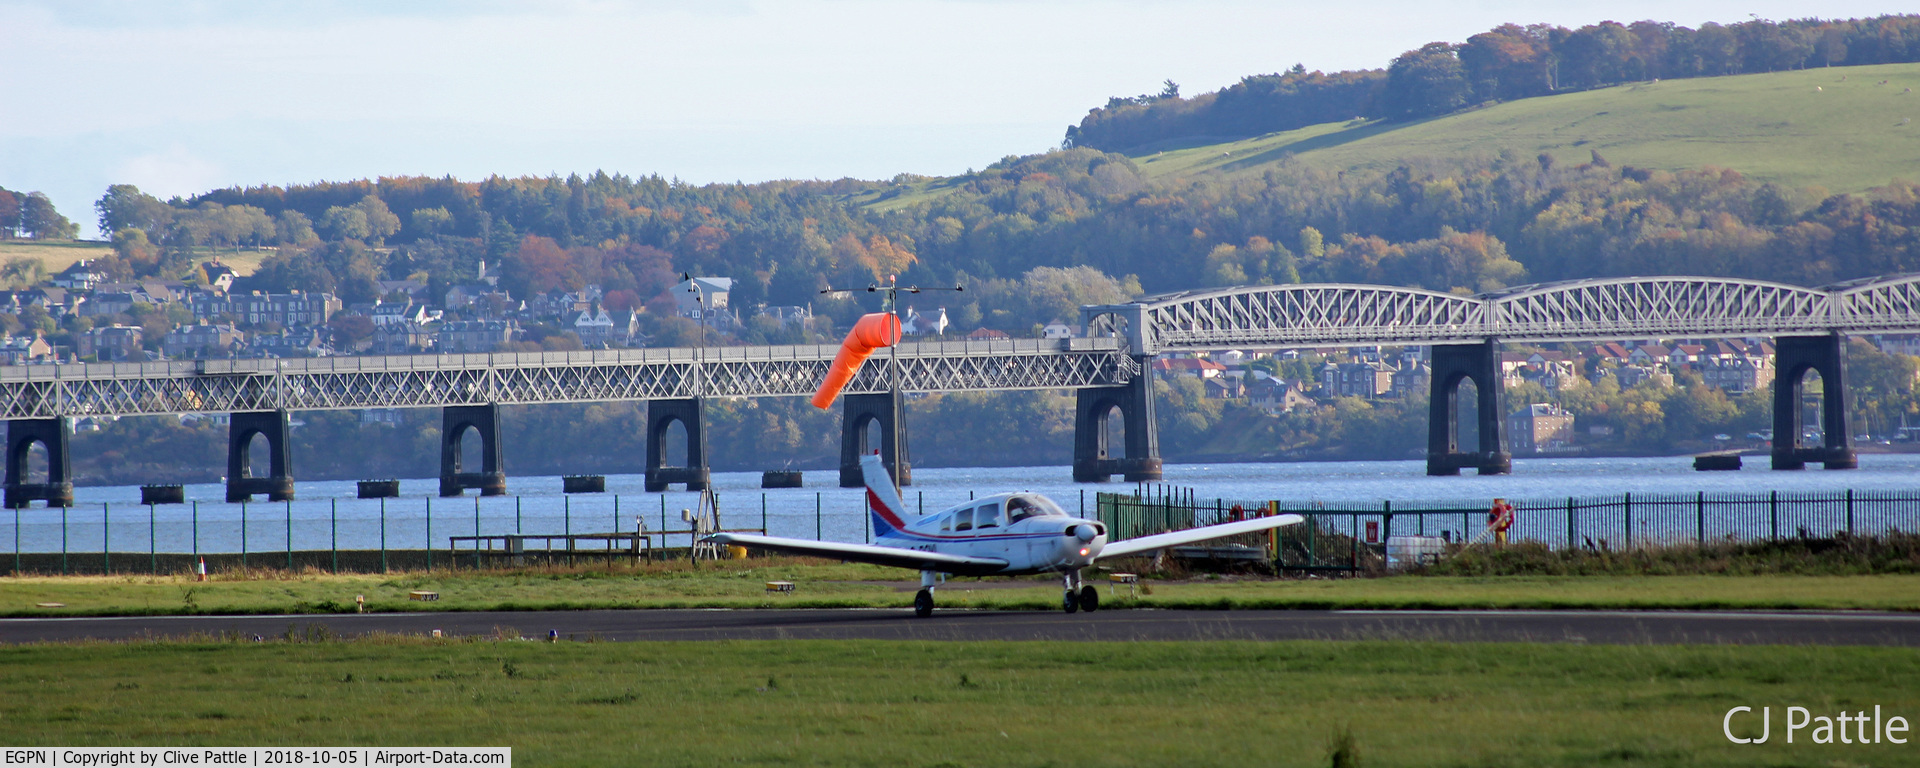 Dundee Airport, Dundee, Scotland United Kingdom (EGPN) - Facing south-east at Dundee with the Tay Rail Bridge in the background.